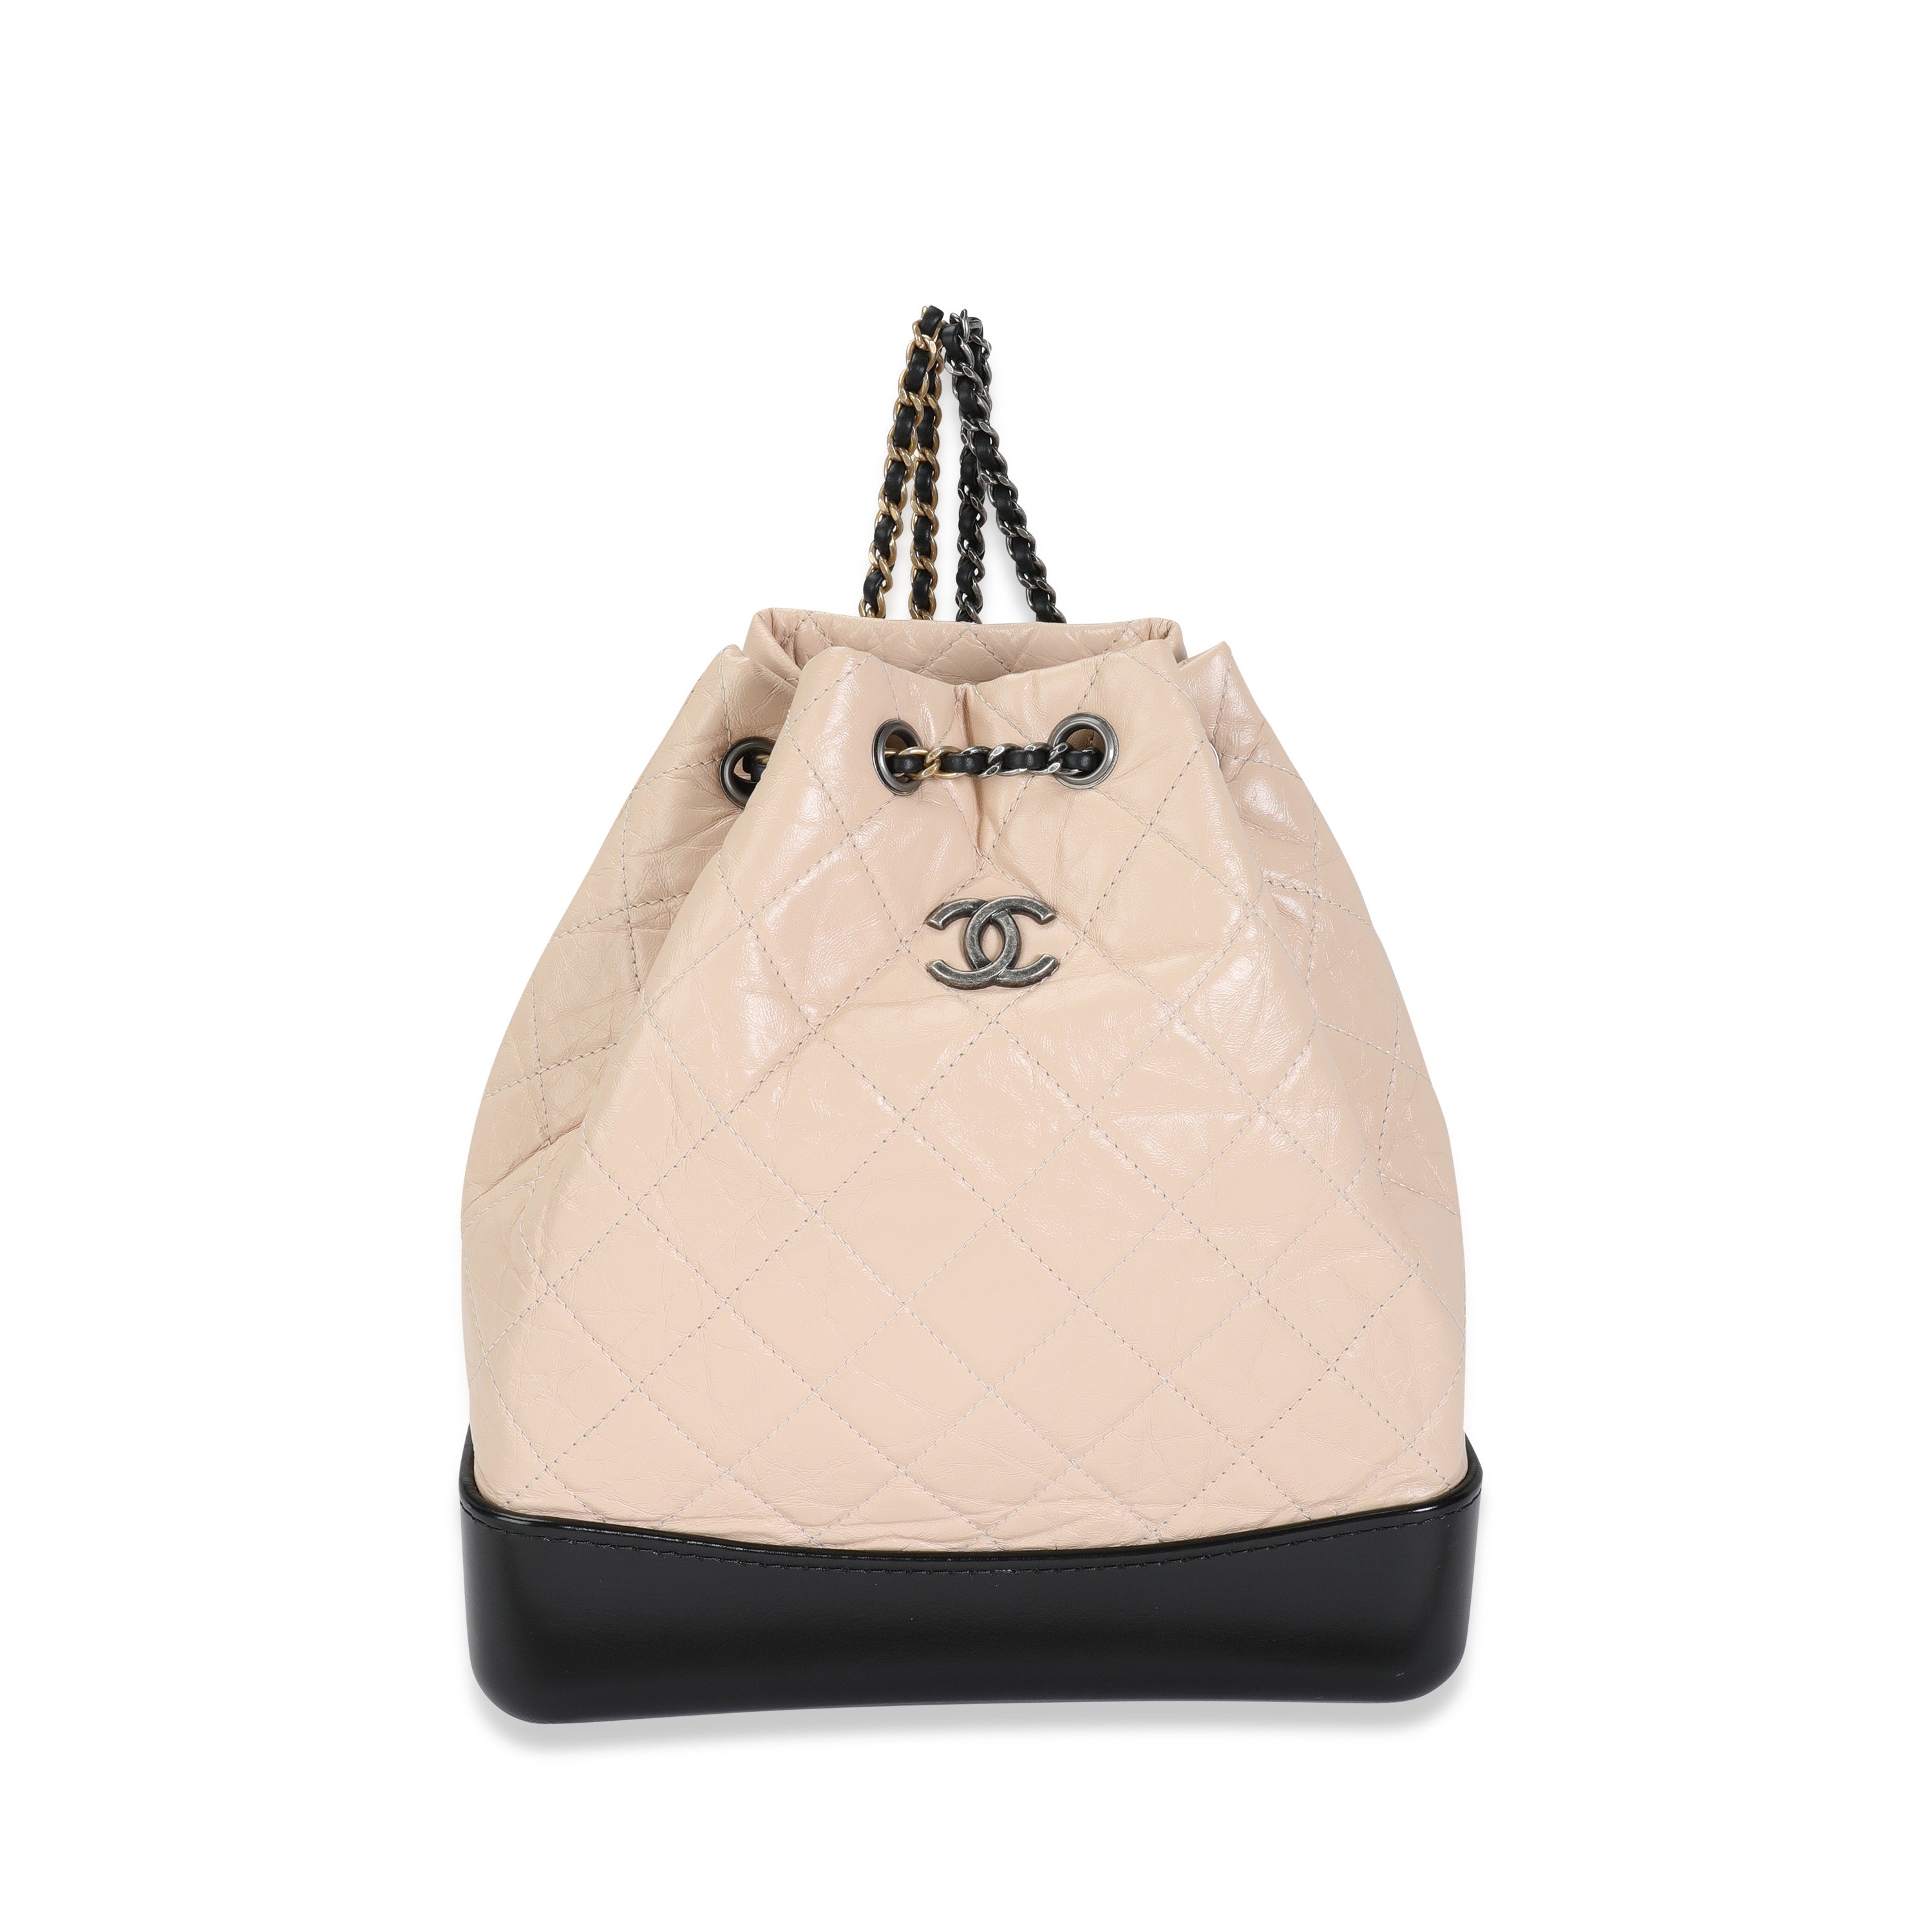 Aged Calfskin Quilted Small Gabrielle Hobo Beige Black